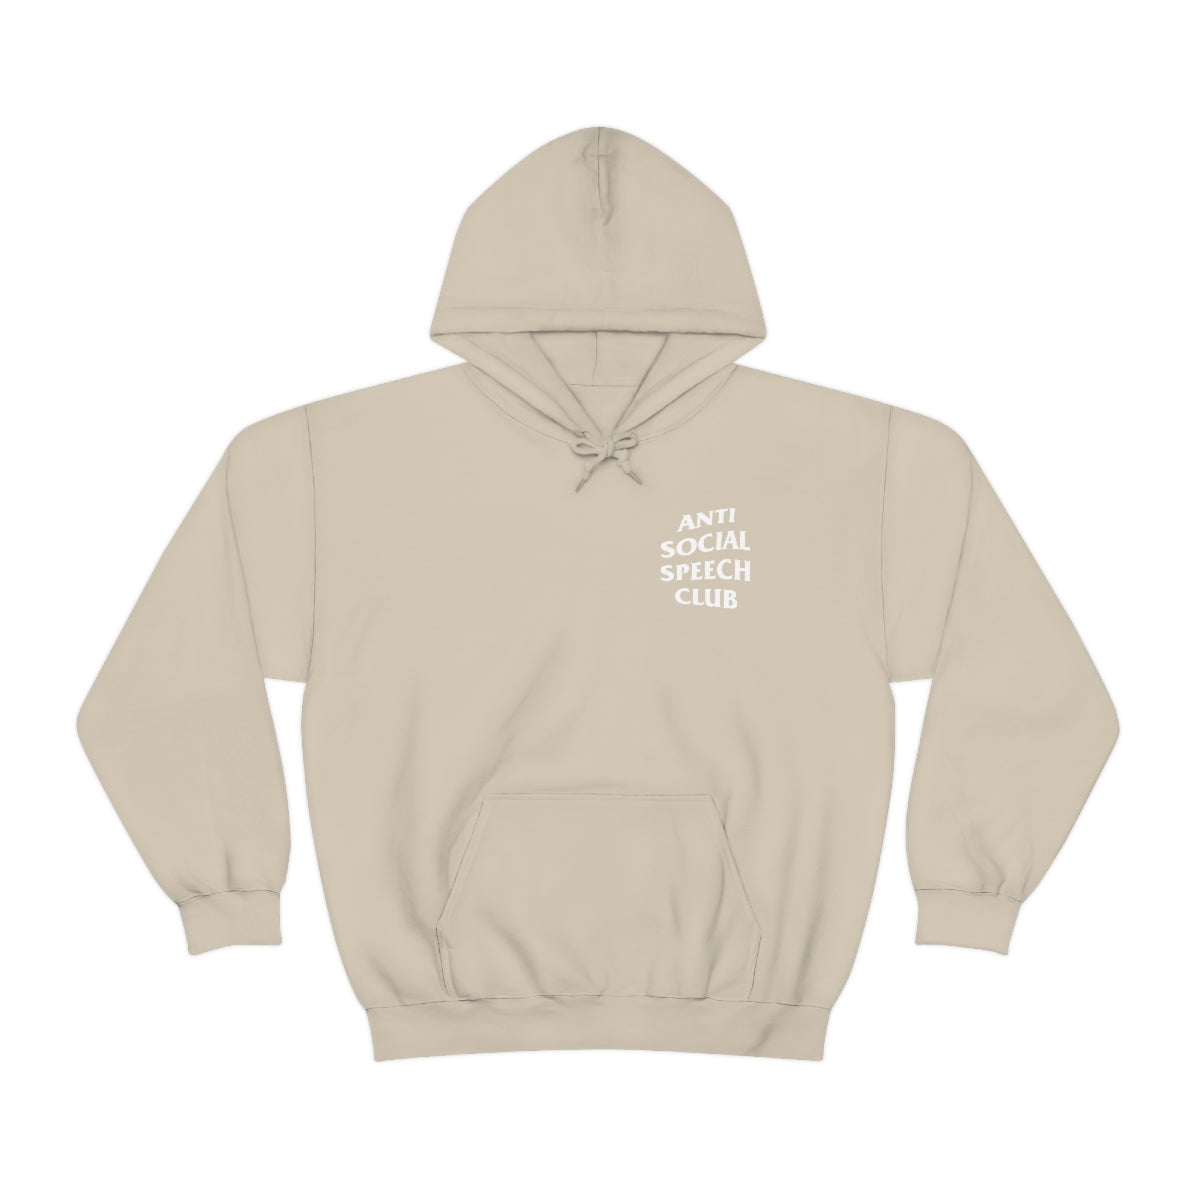 Antisocial Speech Club Hoodie | Front and Back Print